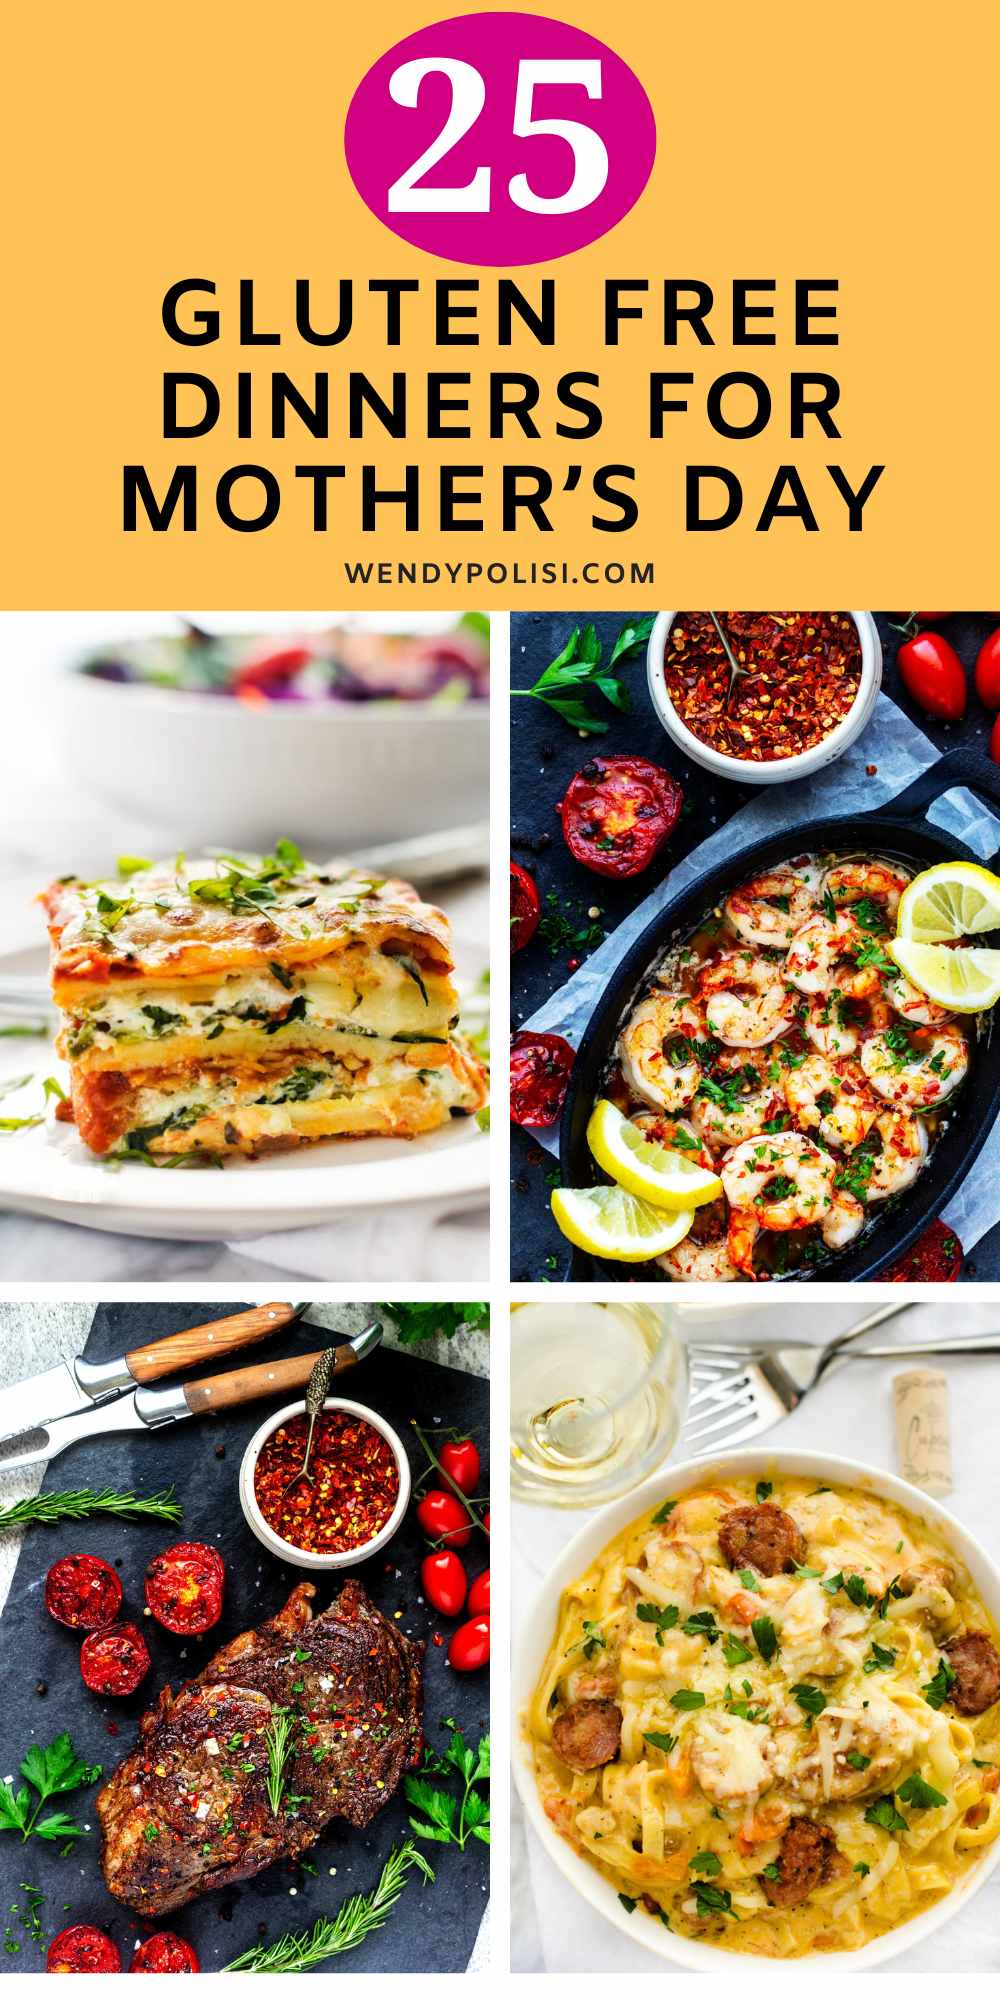 Collage of four images for main course recipes and the text 25 Gluten Free Dinners for Mother's Day above.